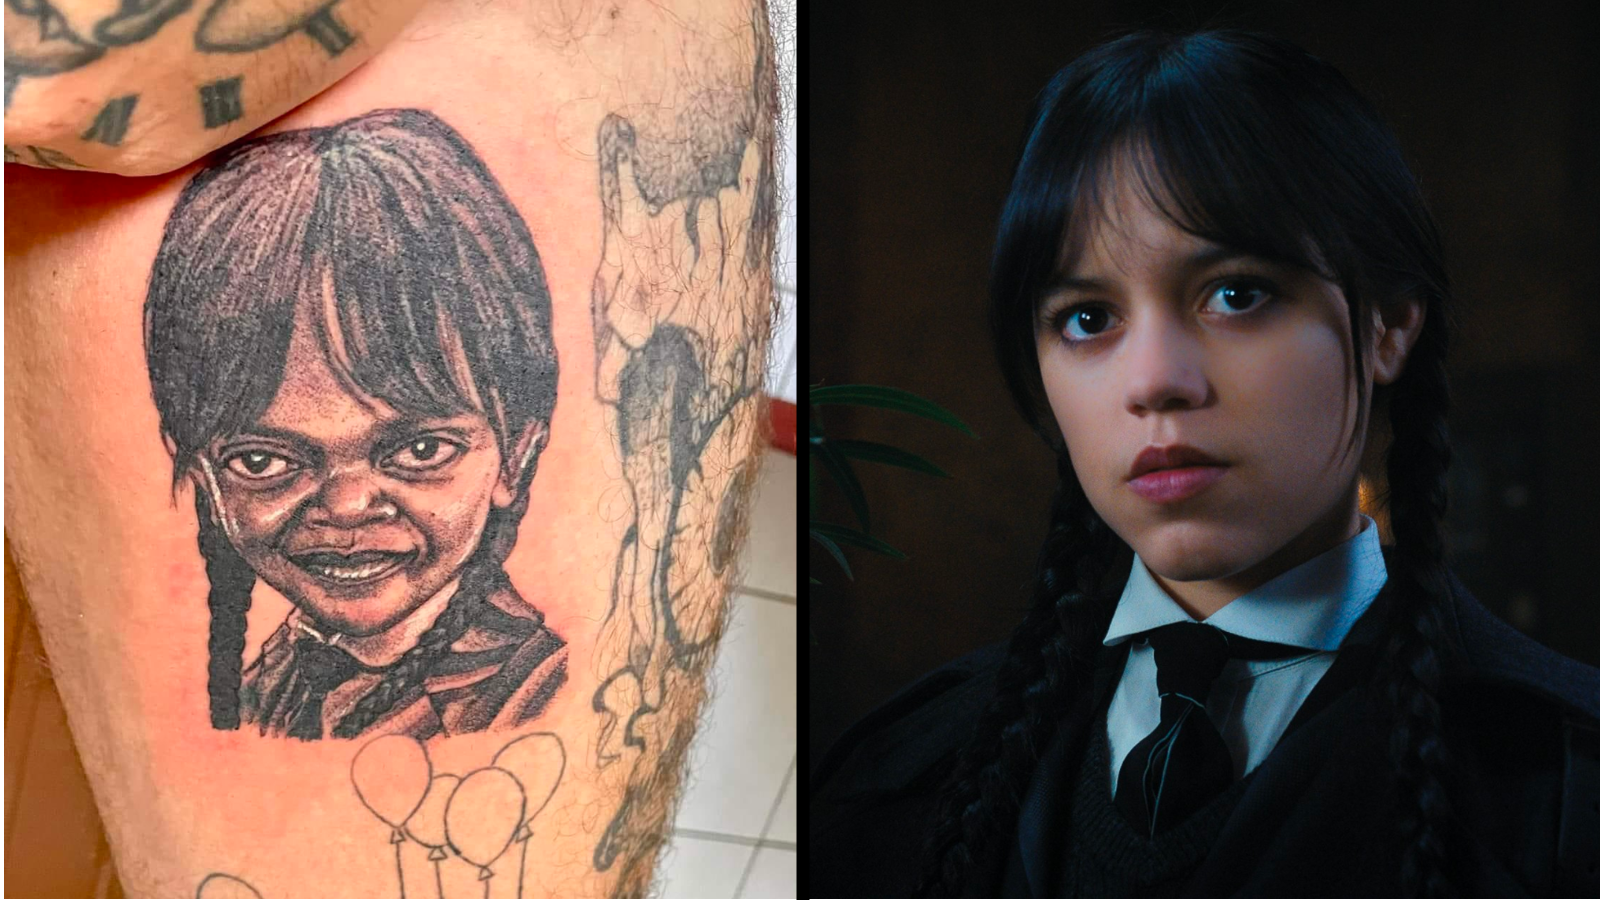 Tattoo of Wednesday Addams gets absolutely roasted and some say it looks  more like Samuel L Jackson